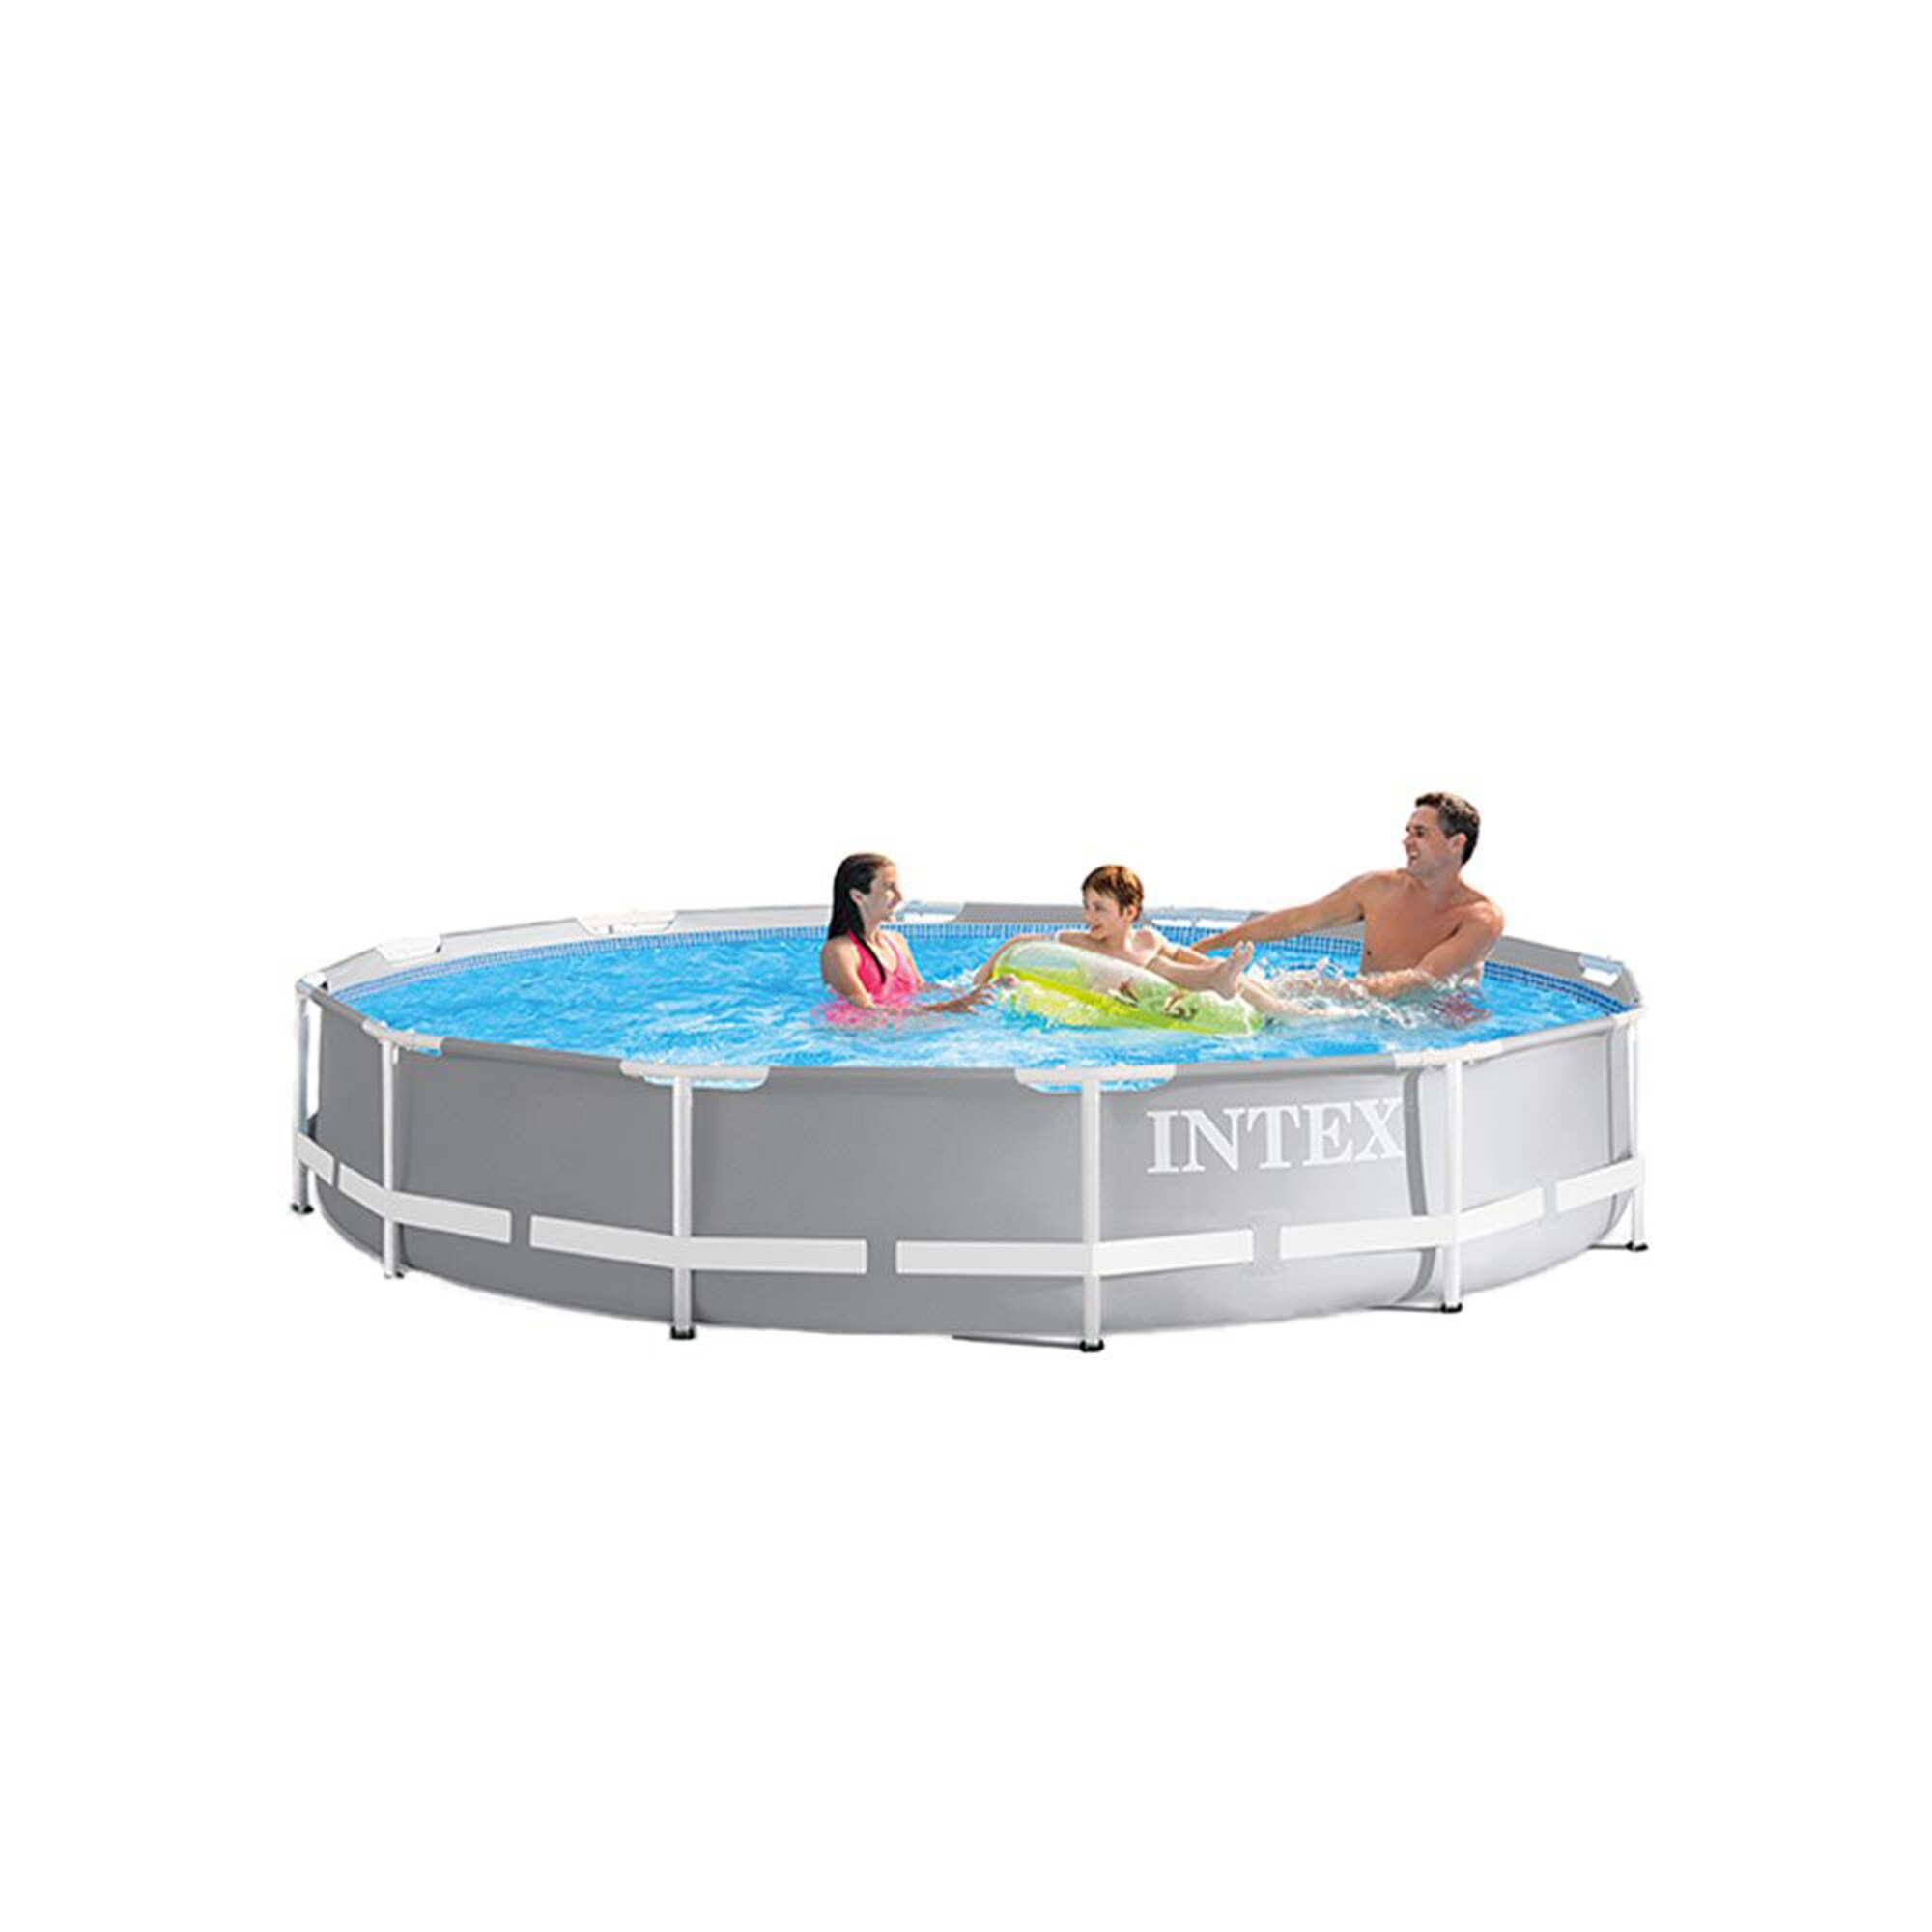 Intex 12 Ft X 12 Ft X 30 In Metal Frame Round Above Ground Pool With Filter Pump In The Above